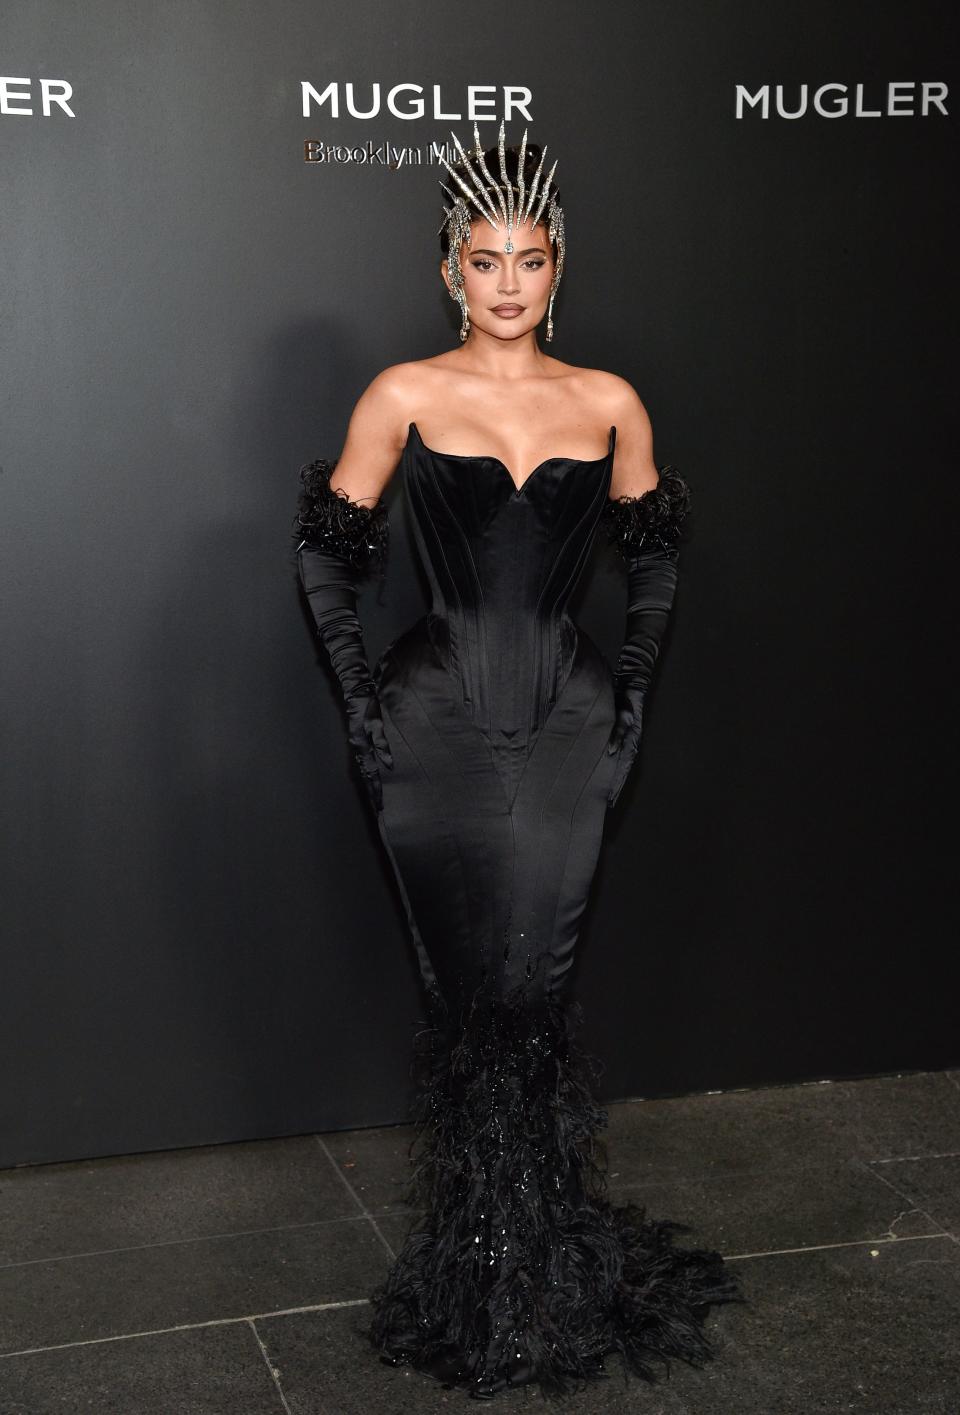 Kylie Jenner at the "Thierry Mugler: Couturissime" Brooklyn Museum opening celebration on November 15, 2022, in New York City.